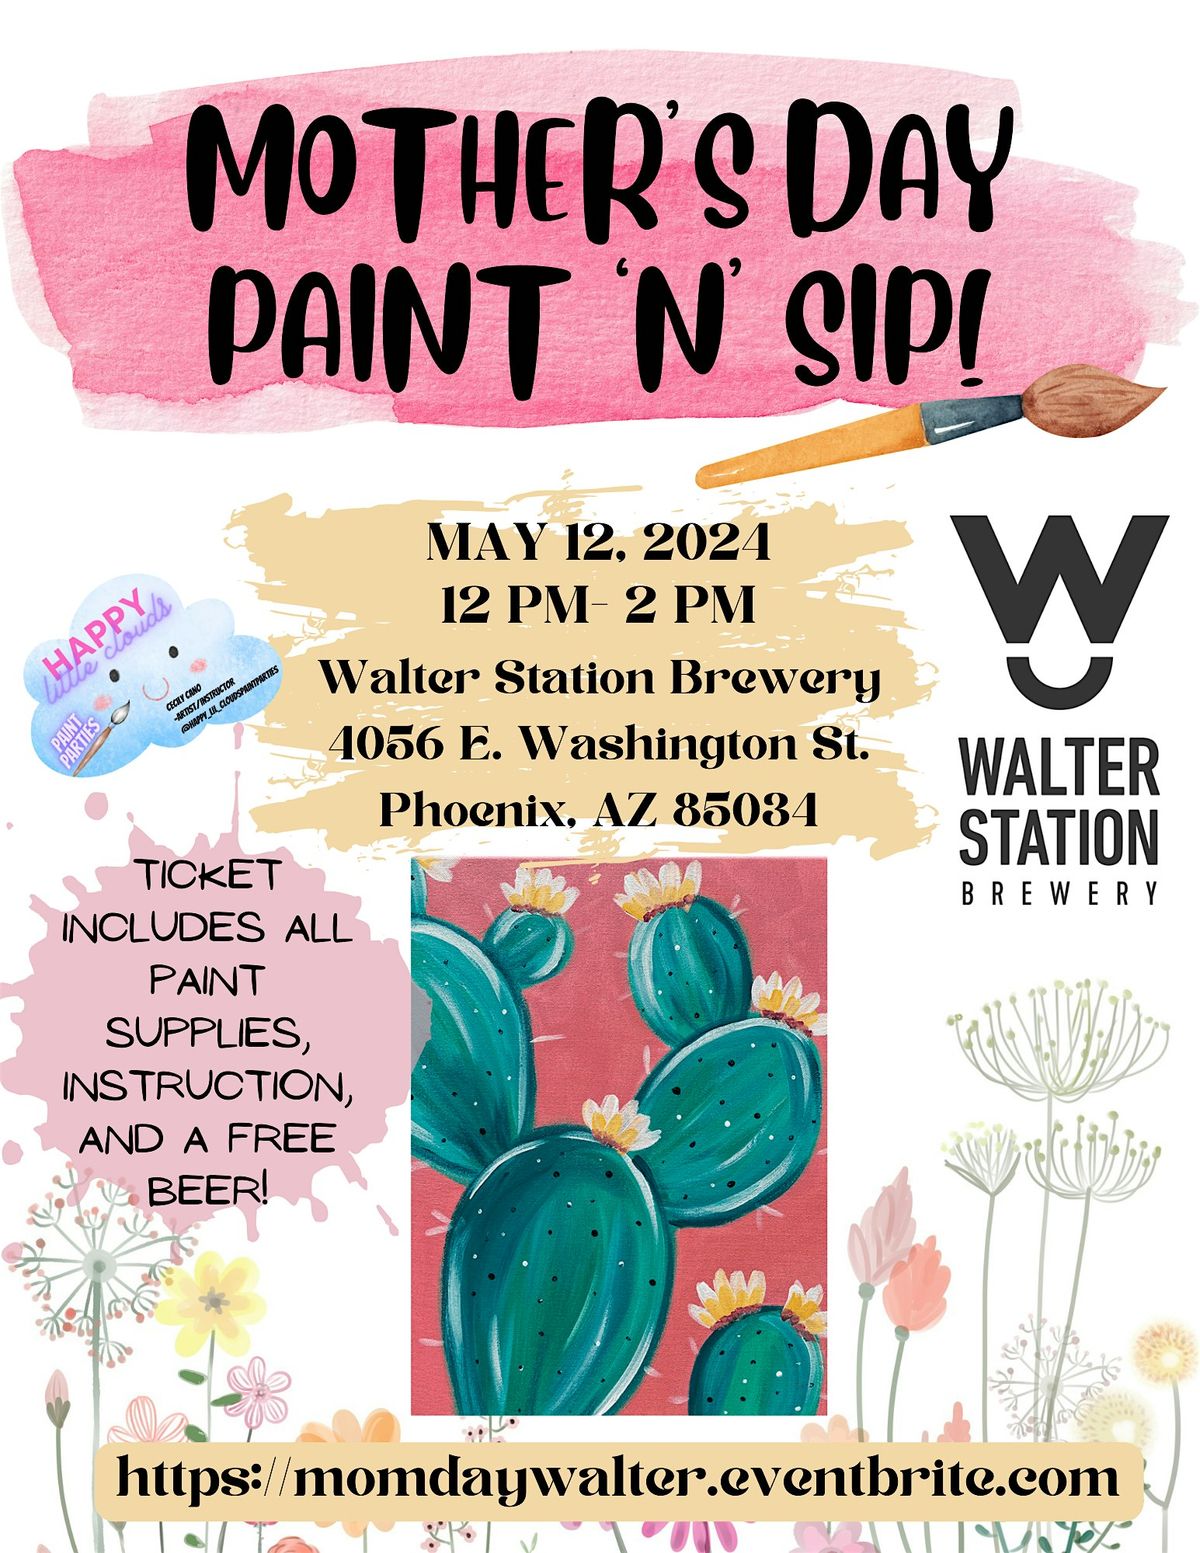 Mother's Day Paint 'n' Sip at Walter Station Brewery